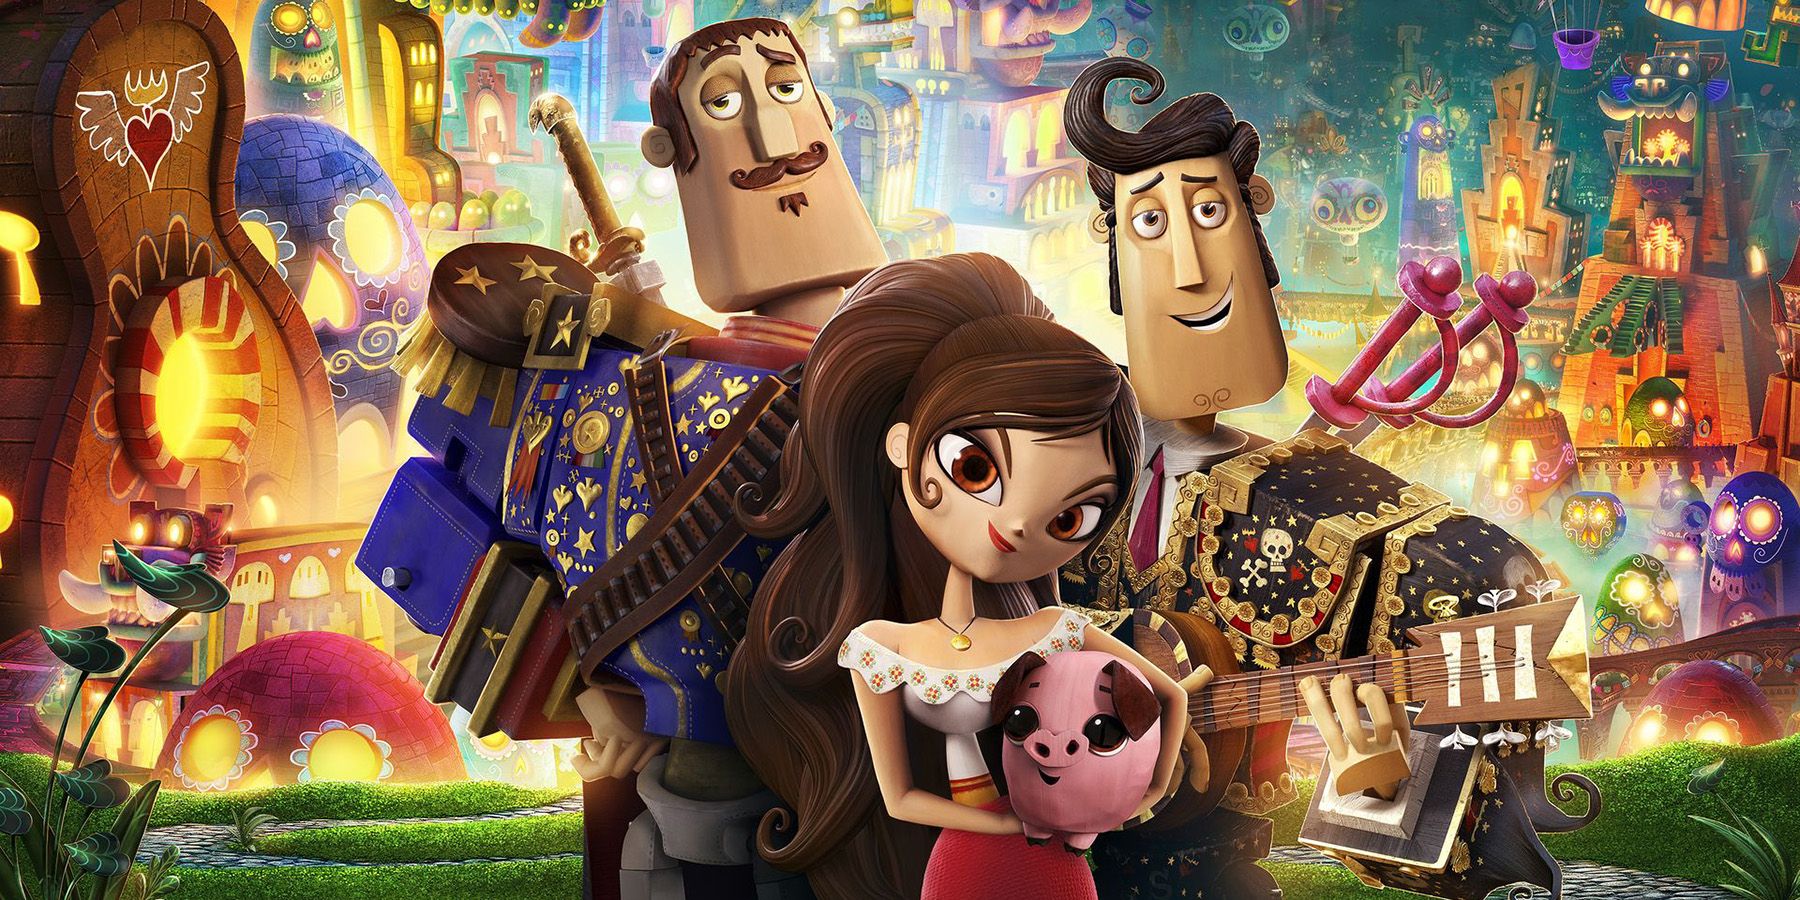 Promotional image for The Book Of Life, full of the films cast of characters